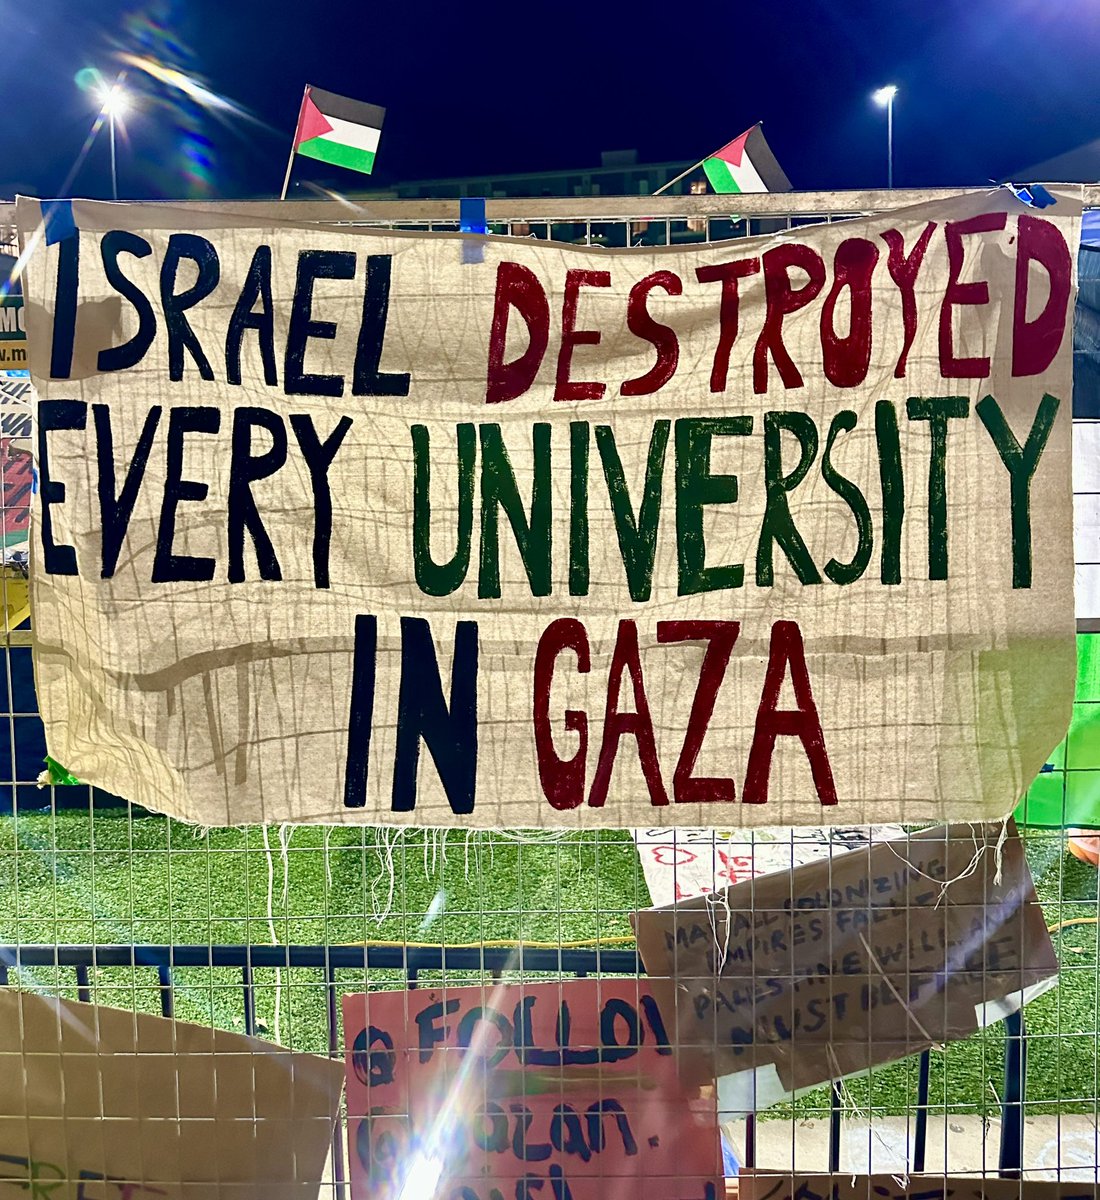 Day 3:  From at university of bc encampment.  Day 208 of genocidal & ecocidal siege on all lives in Gaza.  #FreeFreePalestine #FromTheRiverToTheSea 
@decolonialsol @Gidimten @SamidounPP @defund604